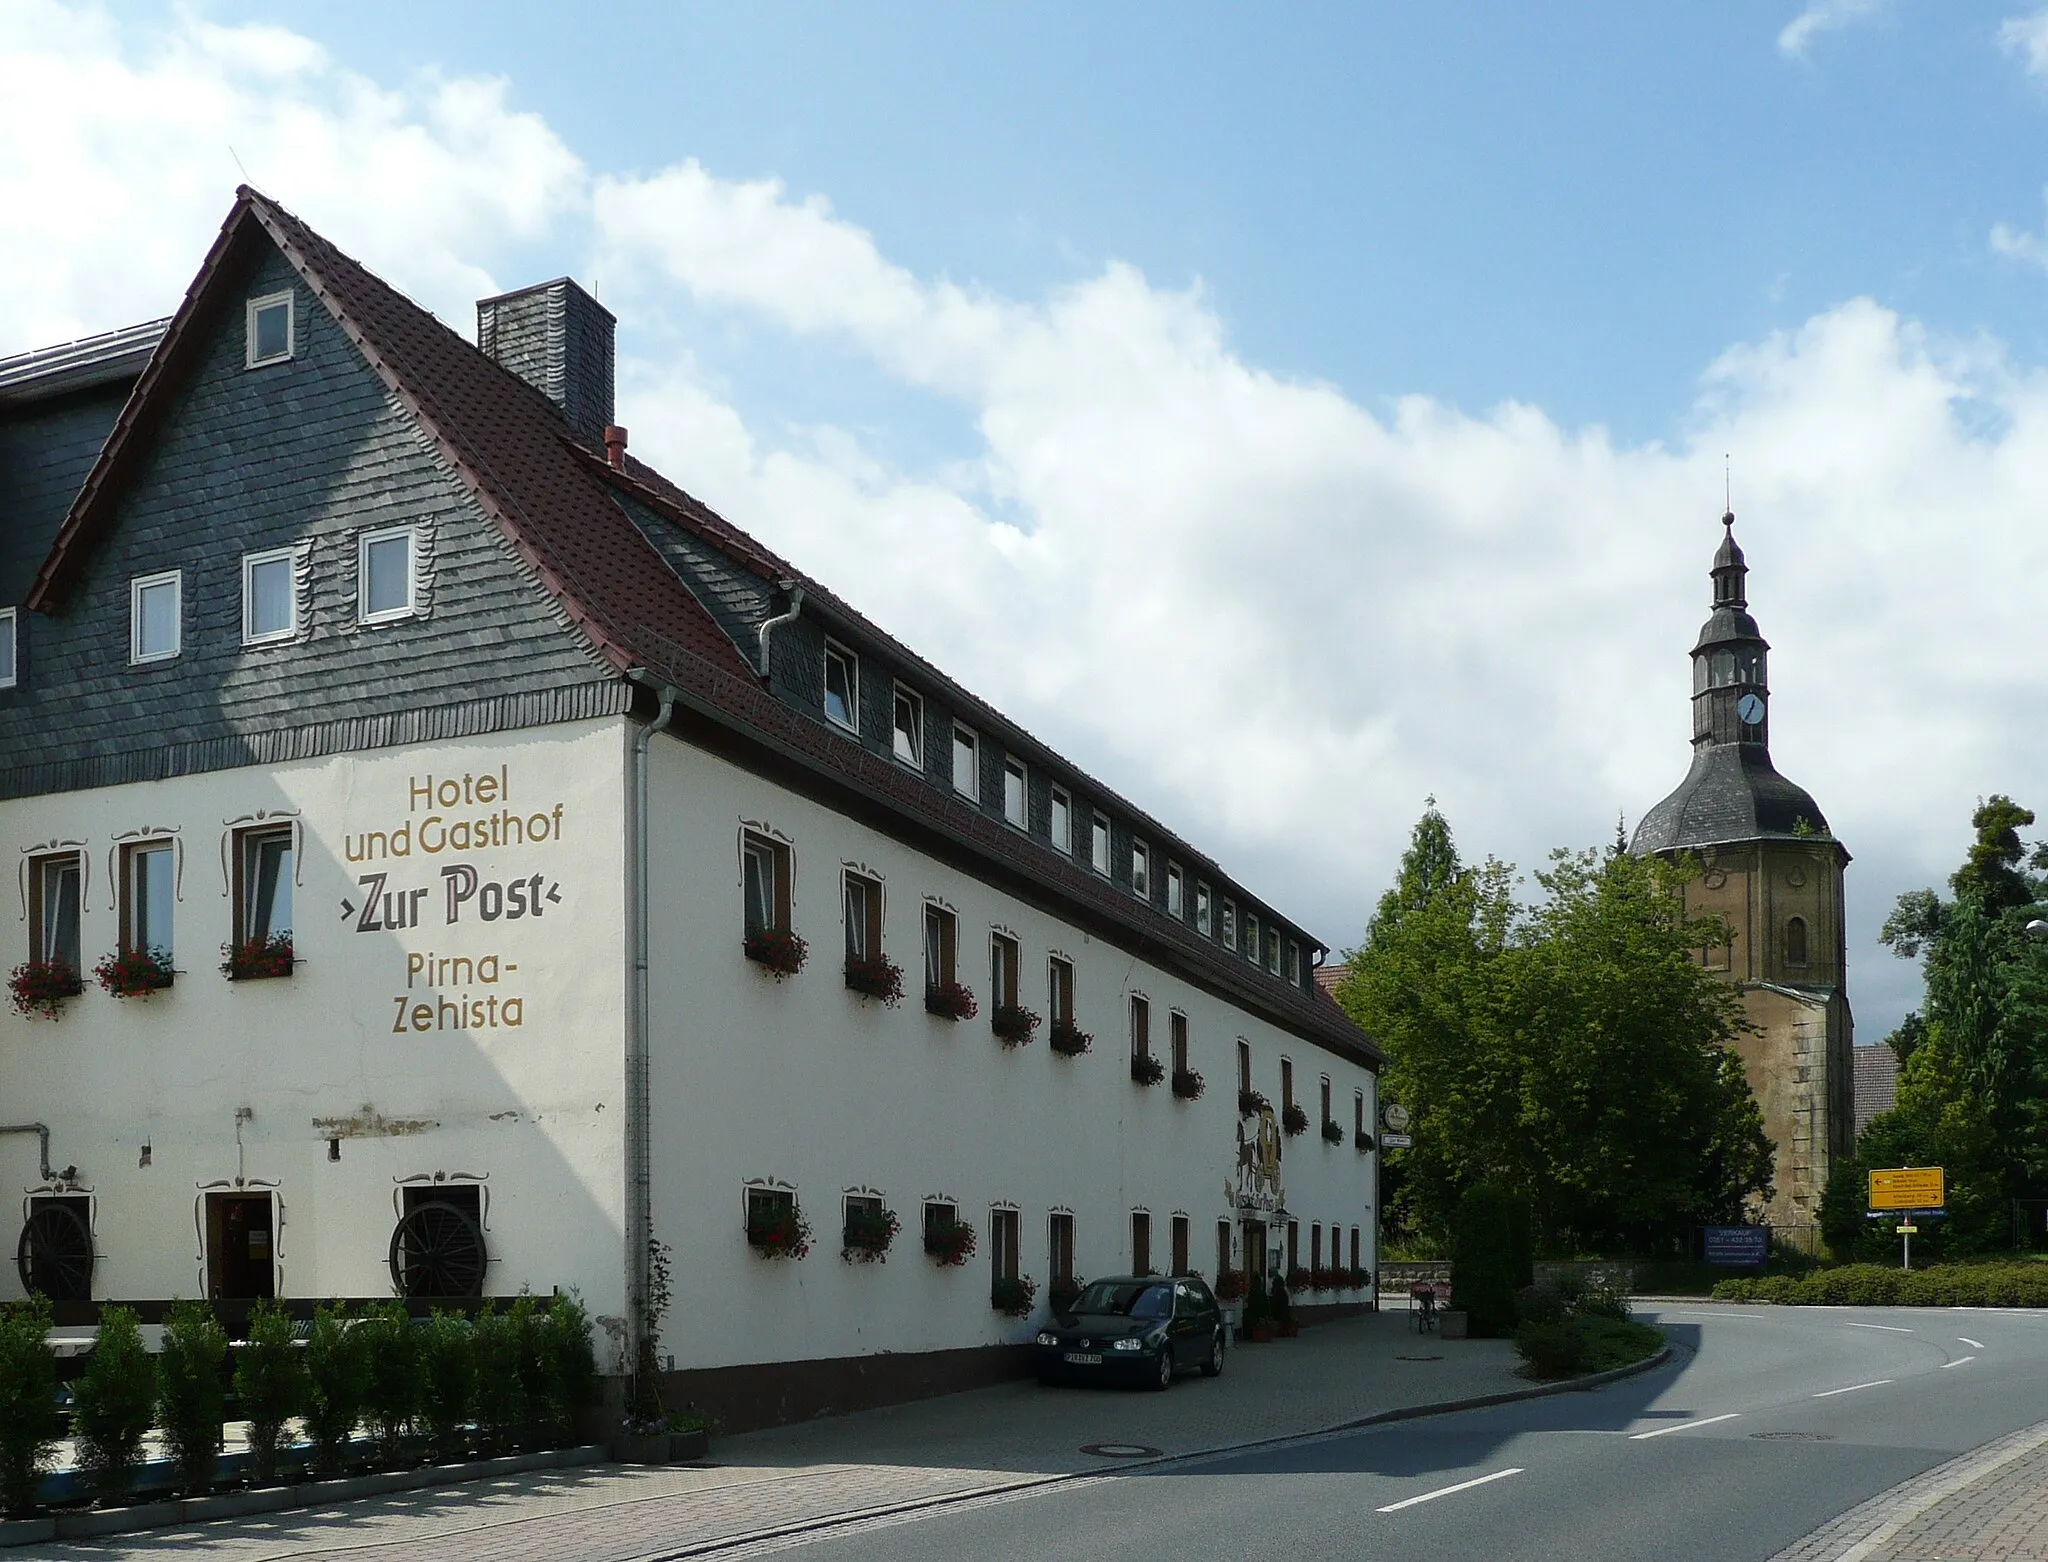 Photo showing: This image shows the hotel and restaurant "Zur Post" with Zehista Castle in the background in Zehista.